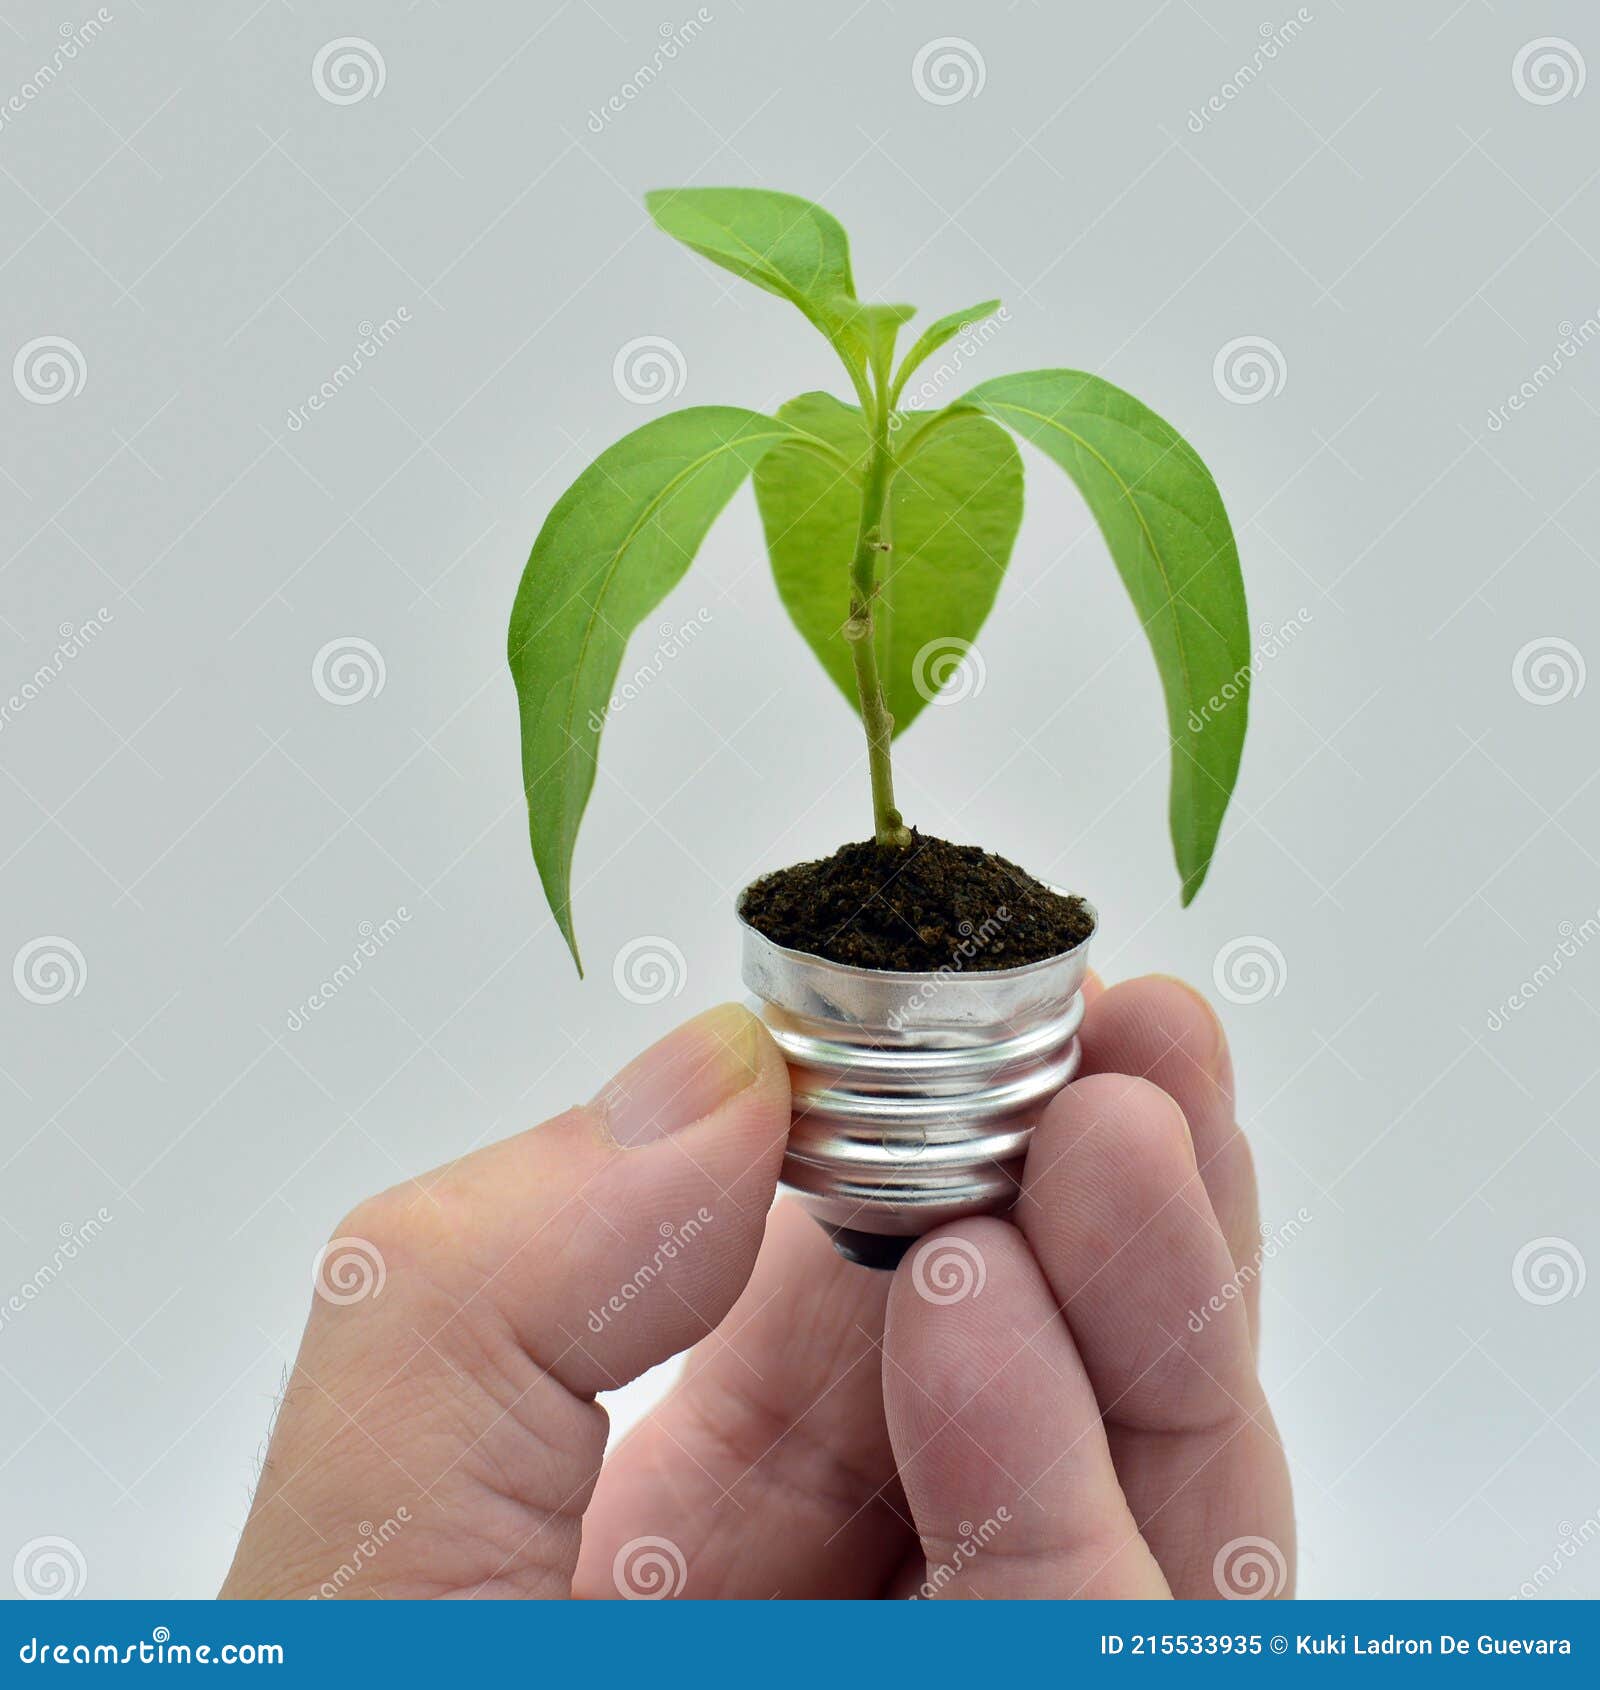 plant growing in a bulb